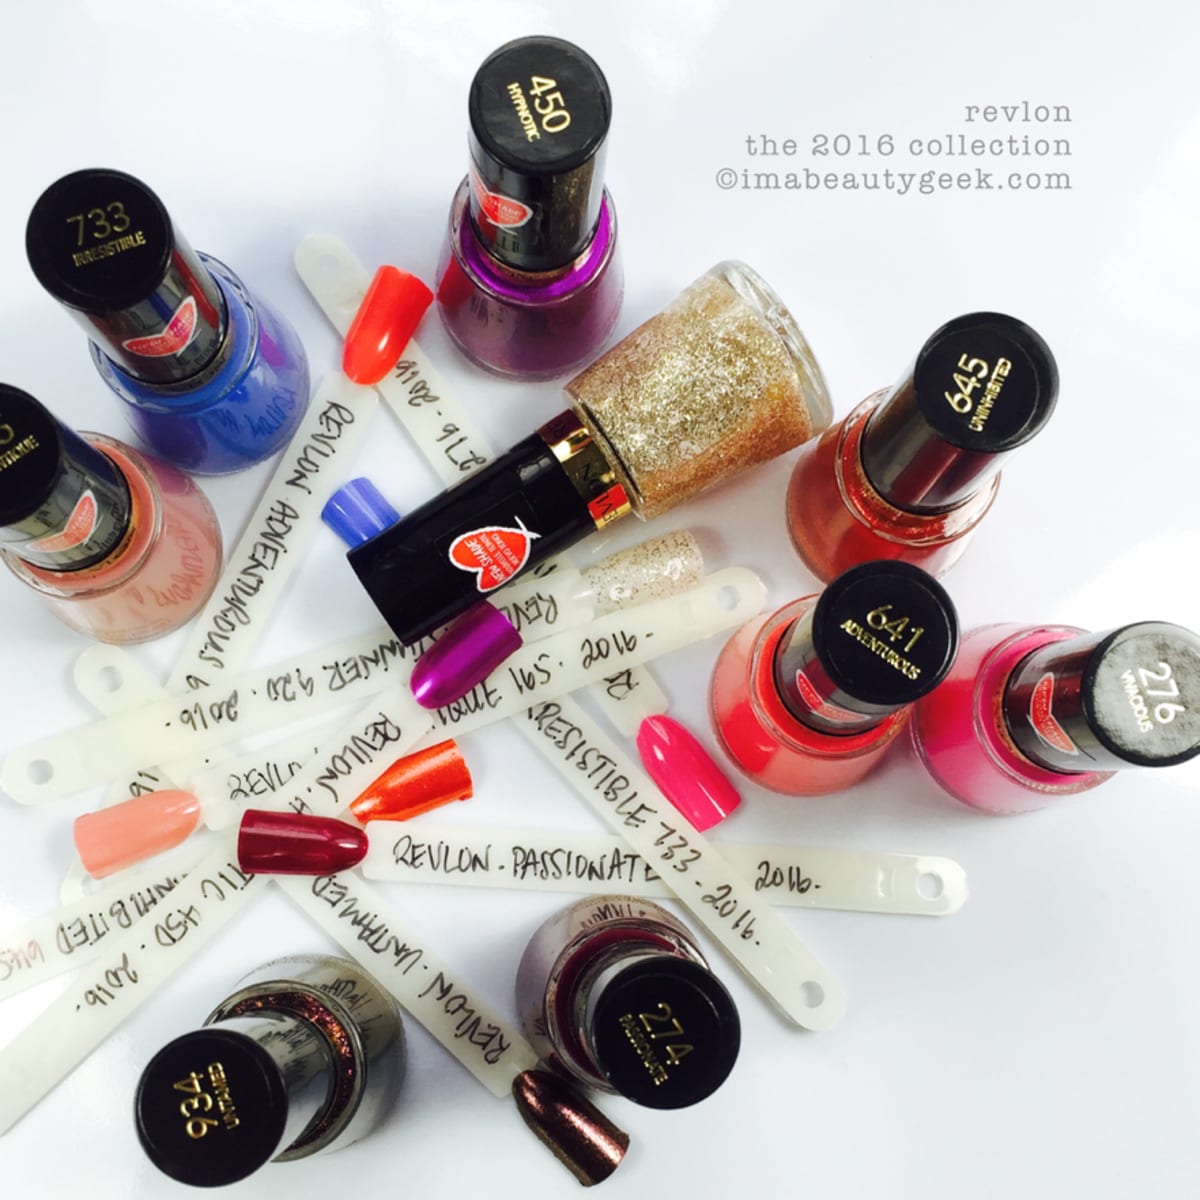 REVLON 2016 NAIL POLISH SWATCHES AND REVIEW - Beautygeeks